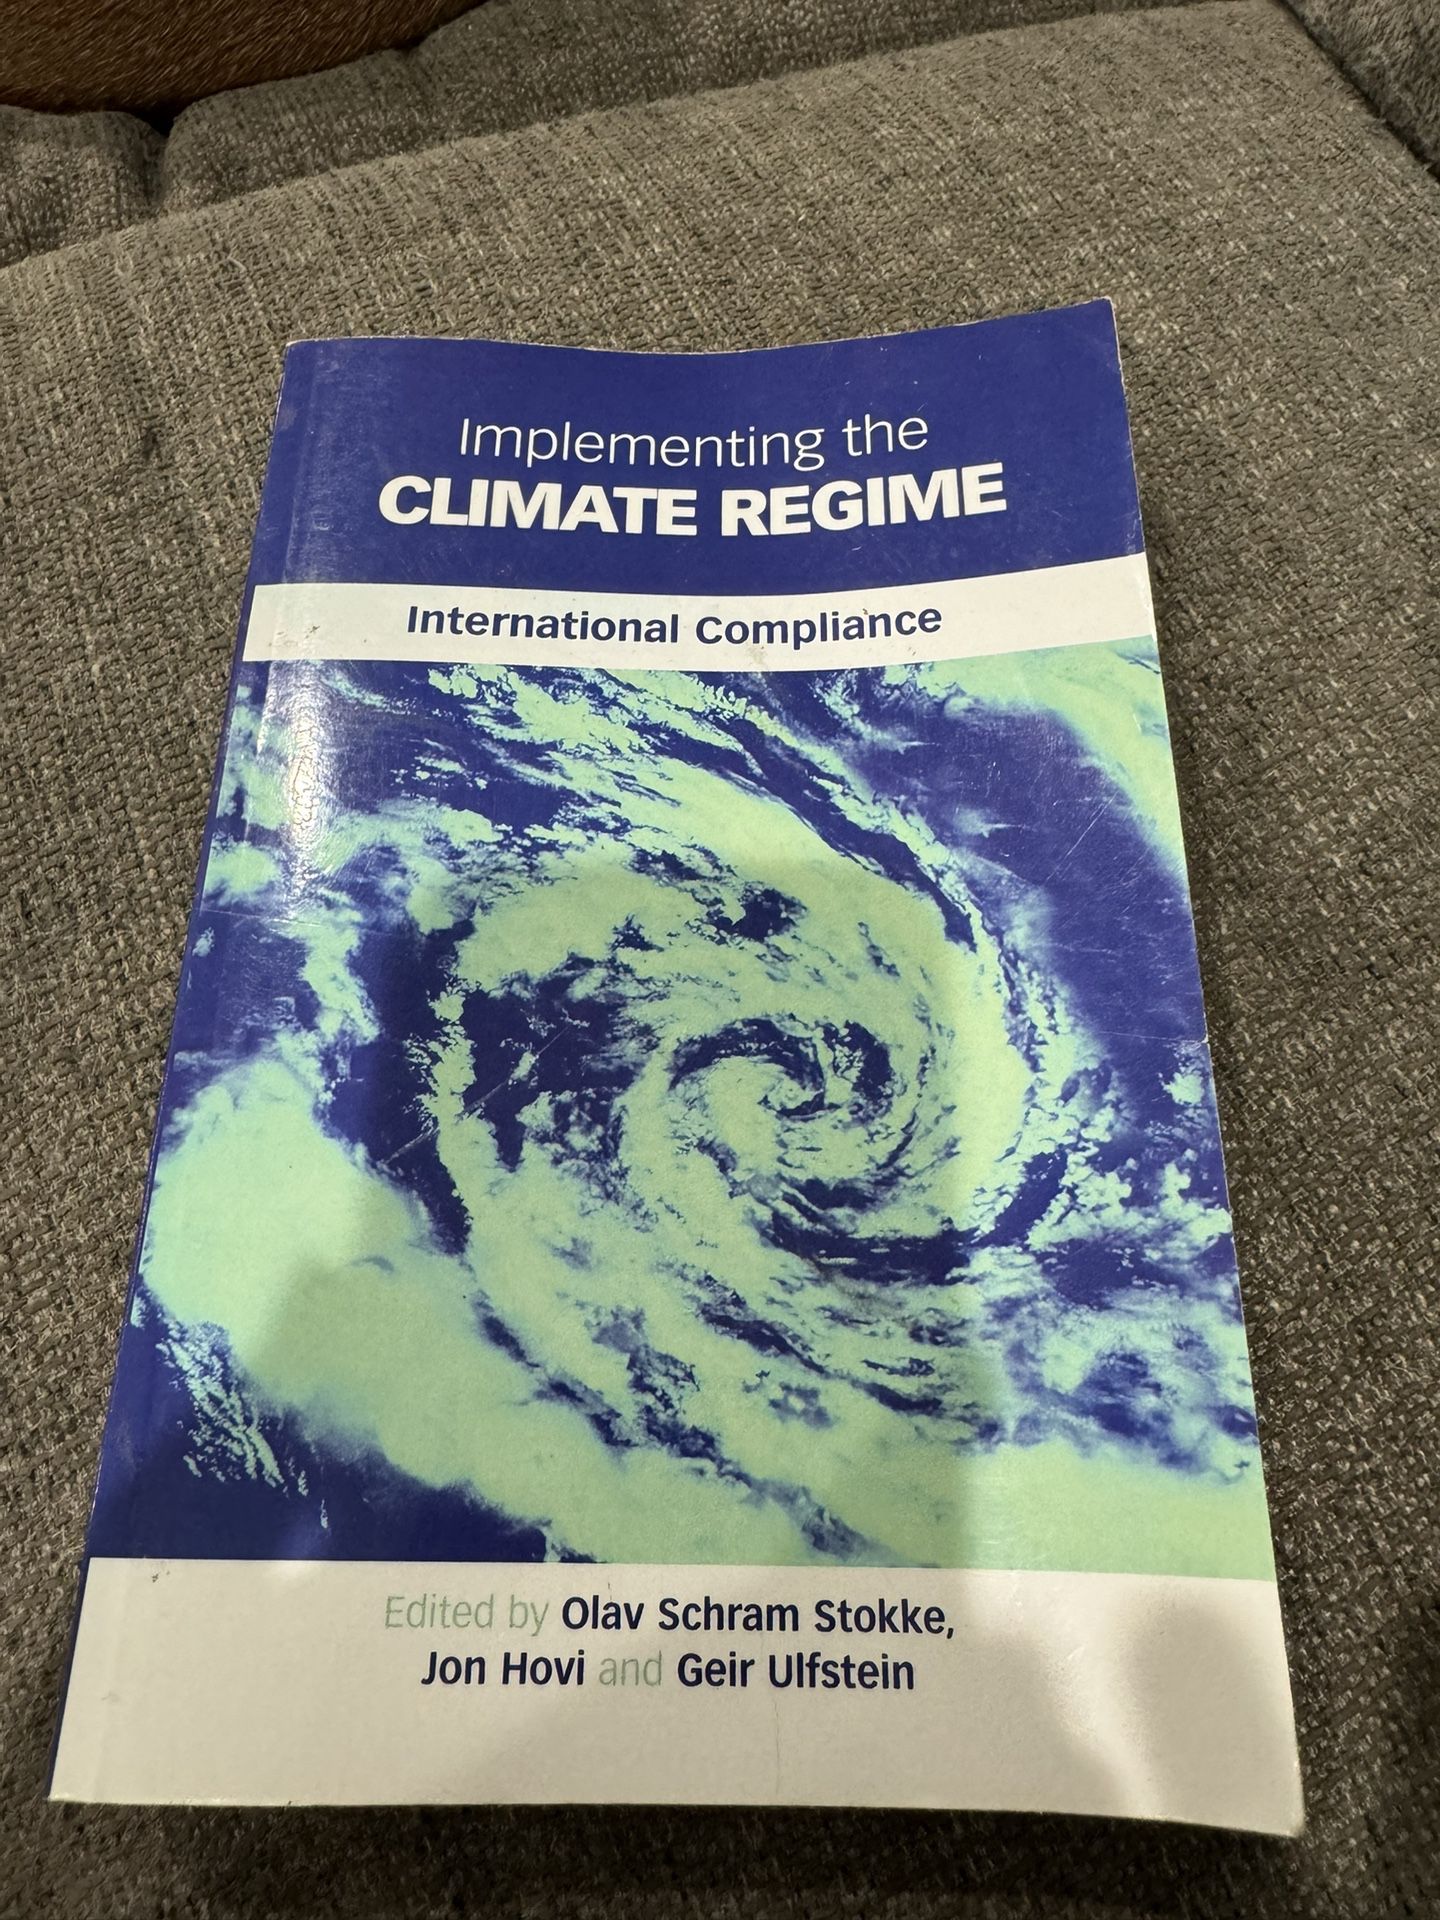 Olav Schram Stokke and 2 more Implementing the Climate Regime: International Compliance 1st Edition ISBN-13: 992405, ISBN-10: 112